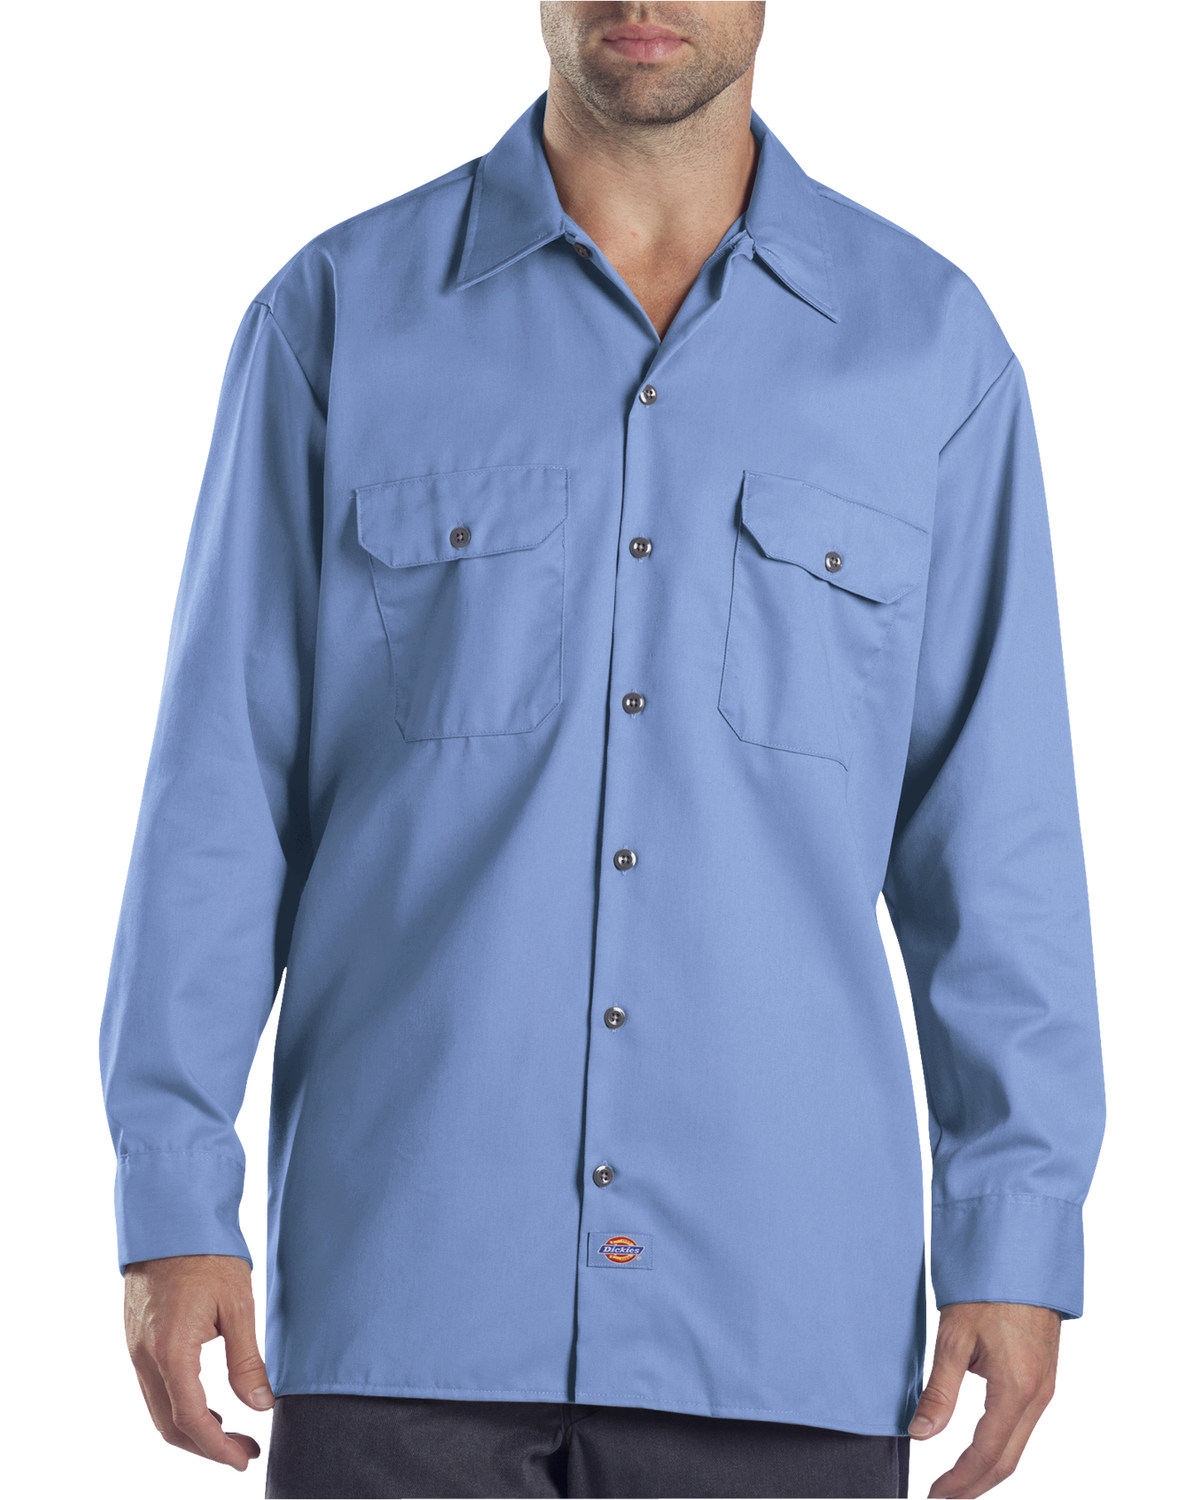 Dickies Men's Solid Twill Button Down Long Sleeve Work Shirt